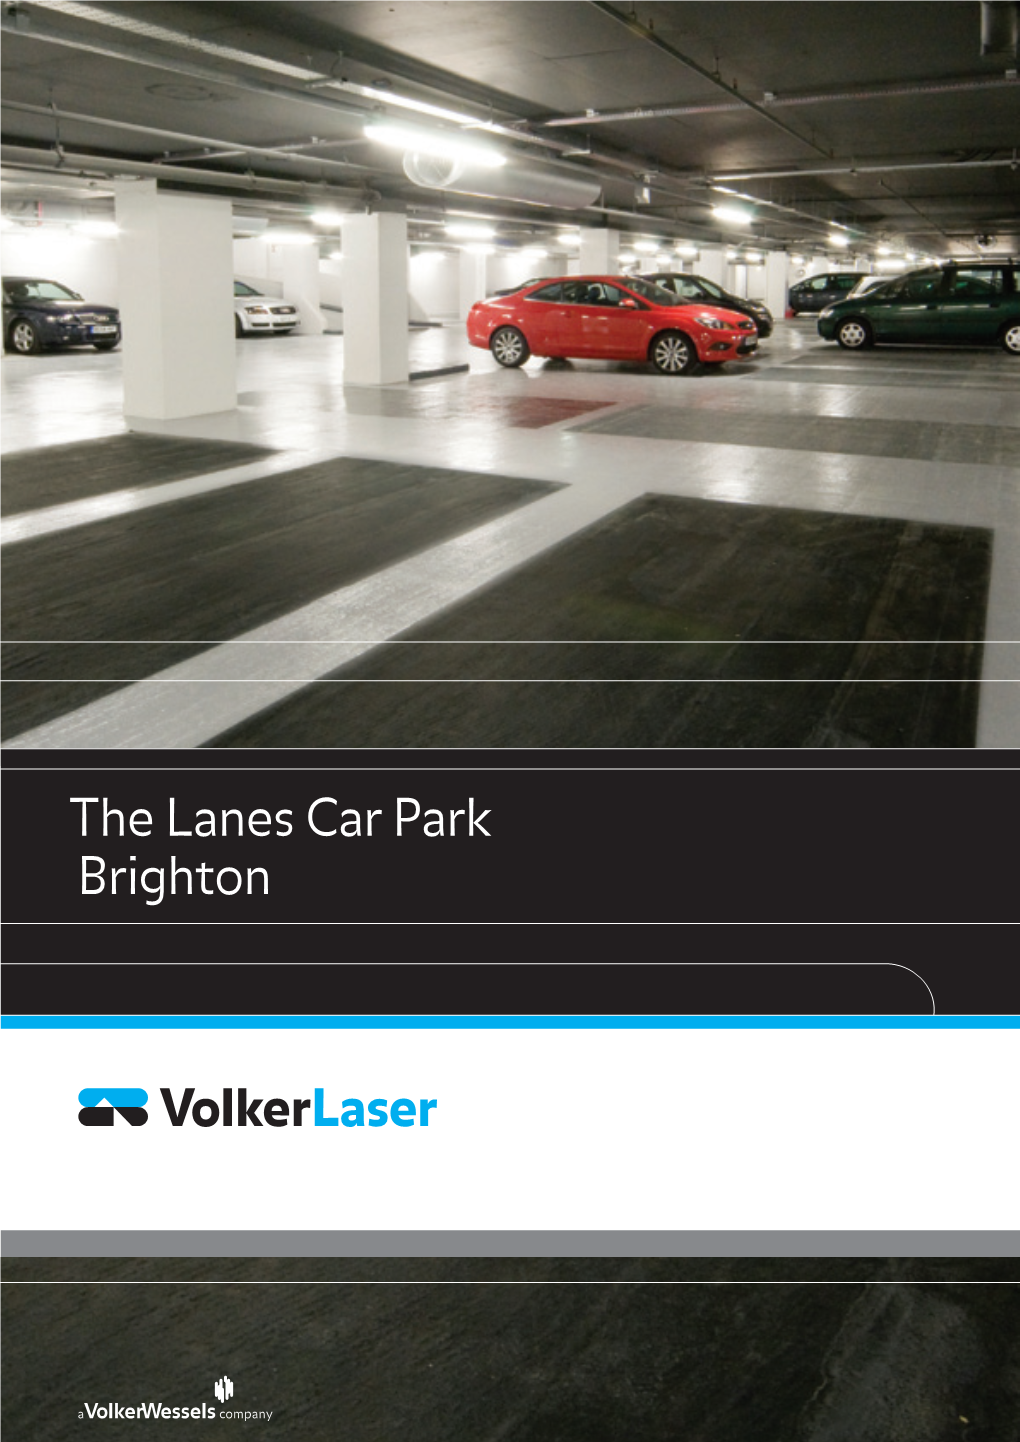 The Lanes Car Park Brighton Project Information